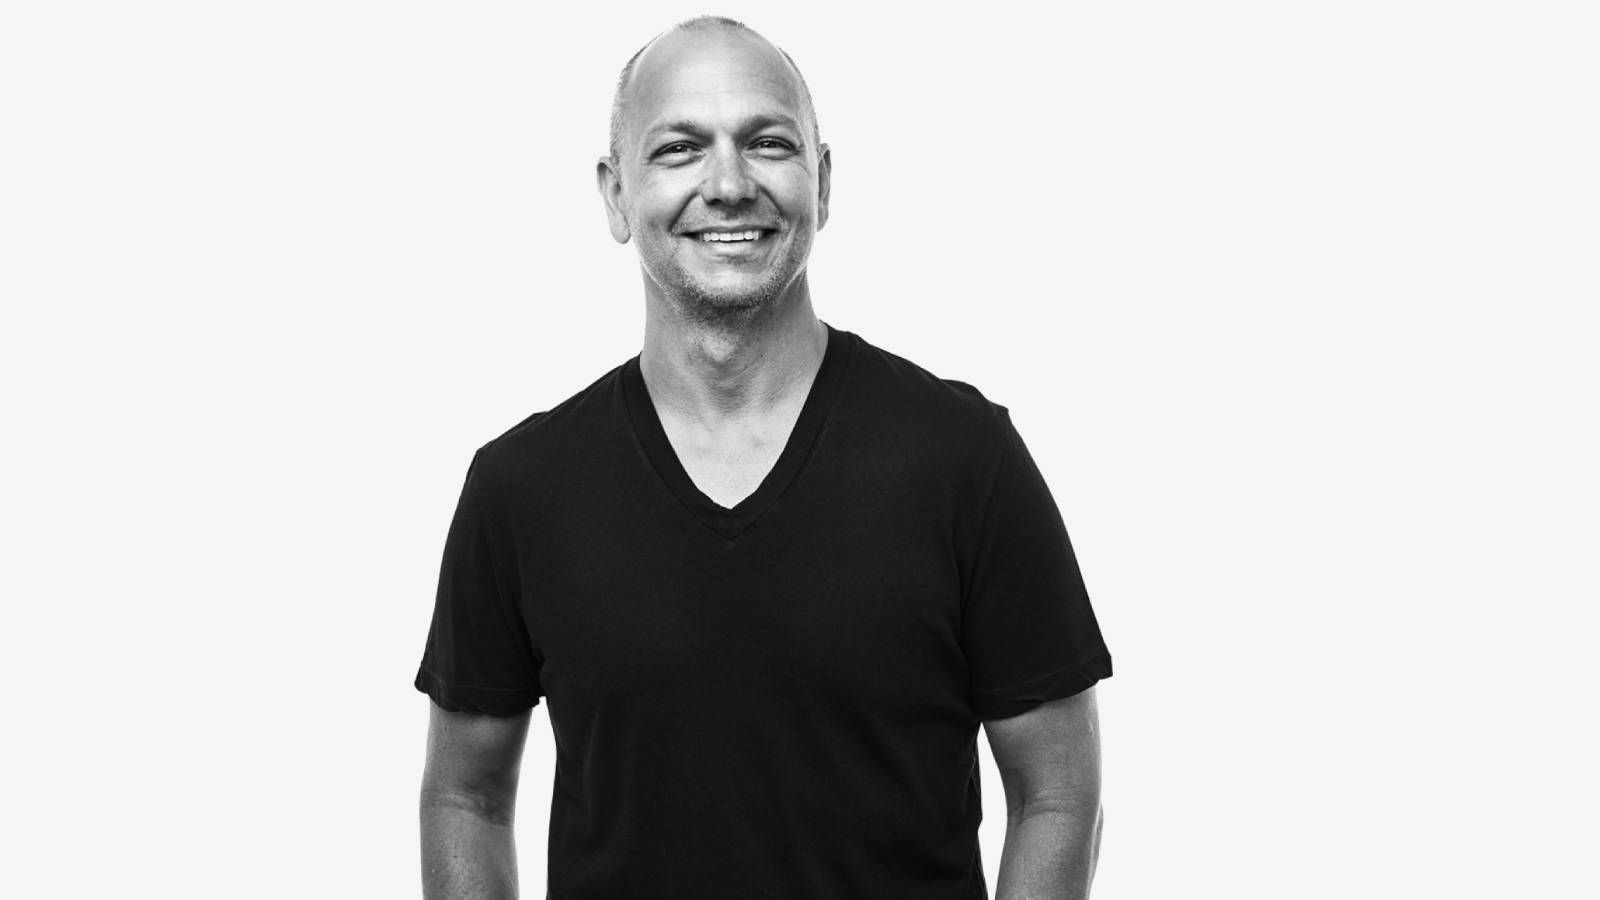 Tony Fadell Discusses His New Book, Early Days of iPhone and iPod, Apple vs. Google Culture, and More